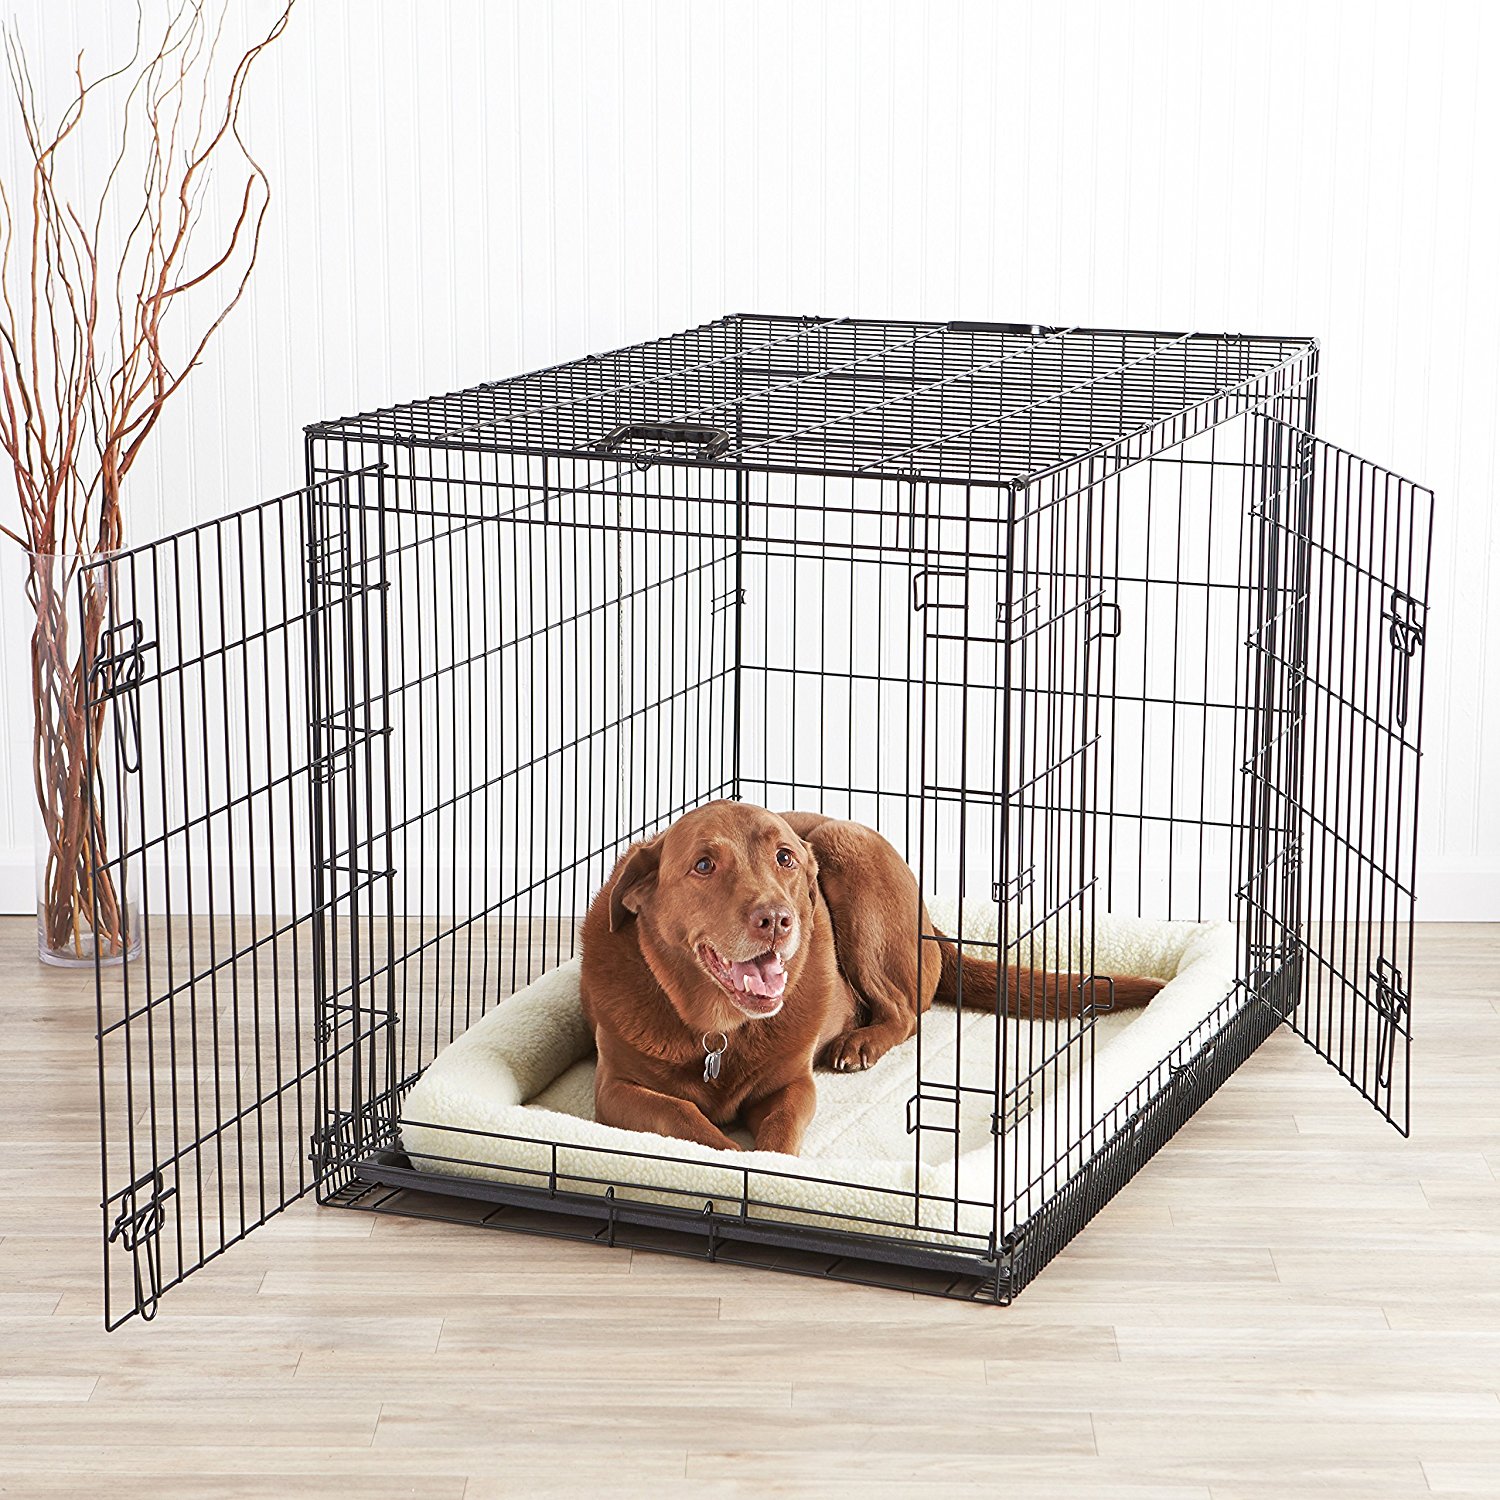 dog crate for adopting a new dog